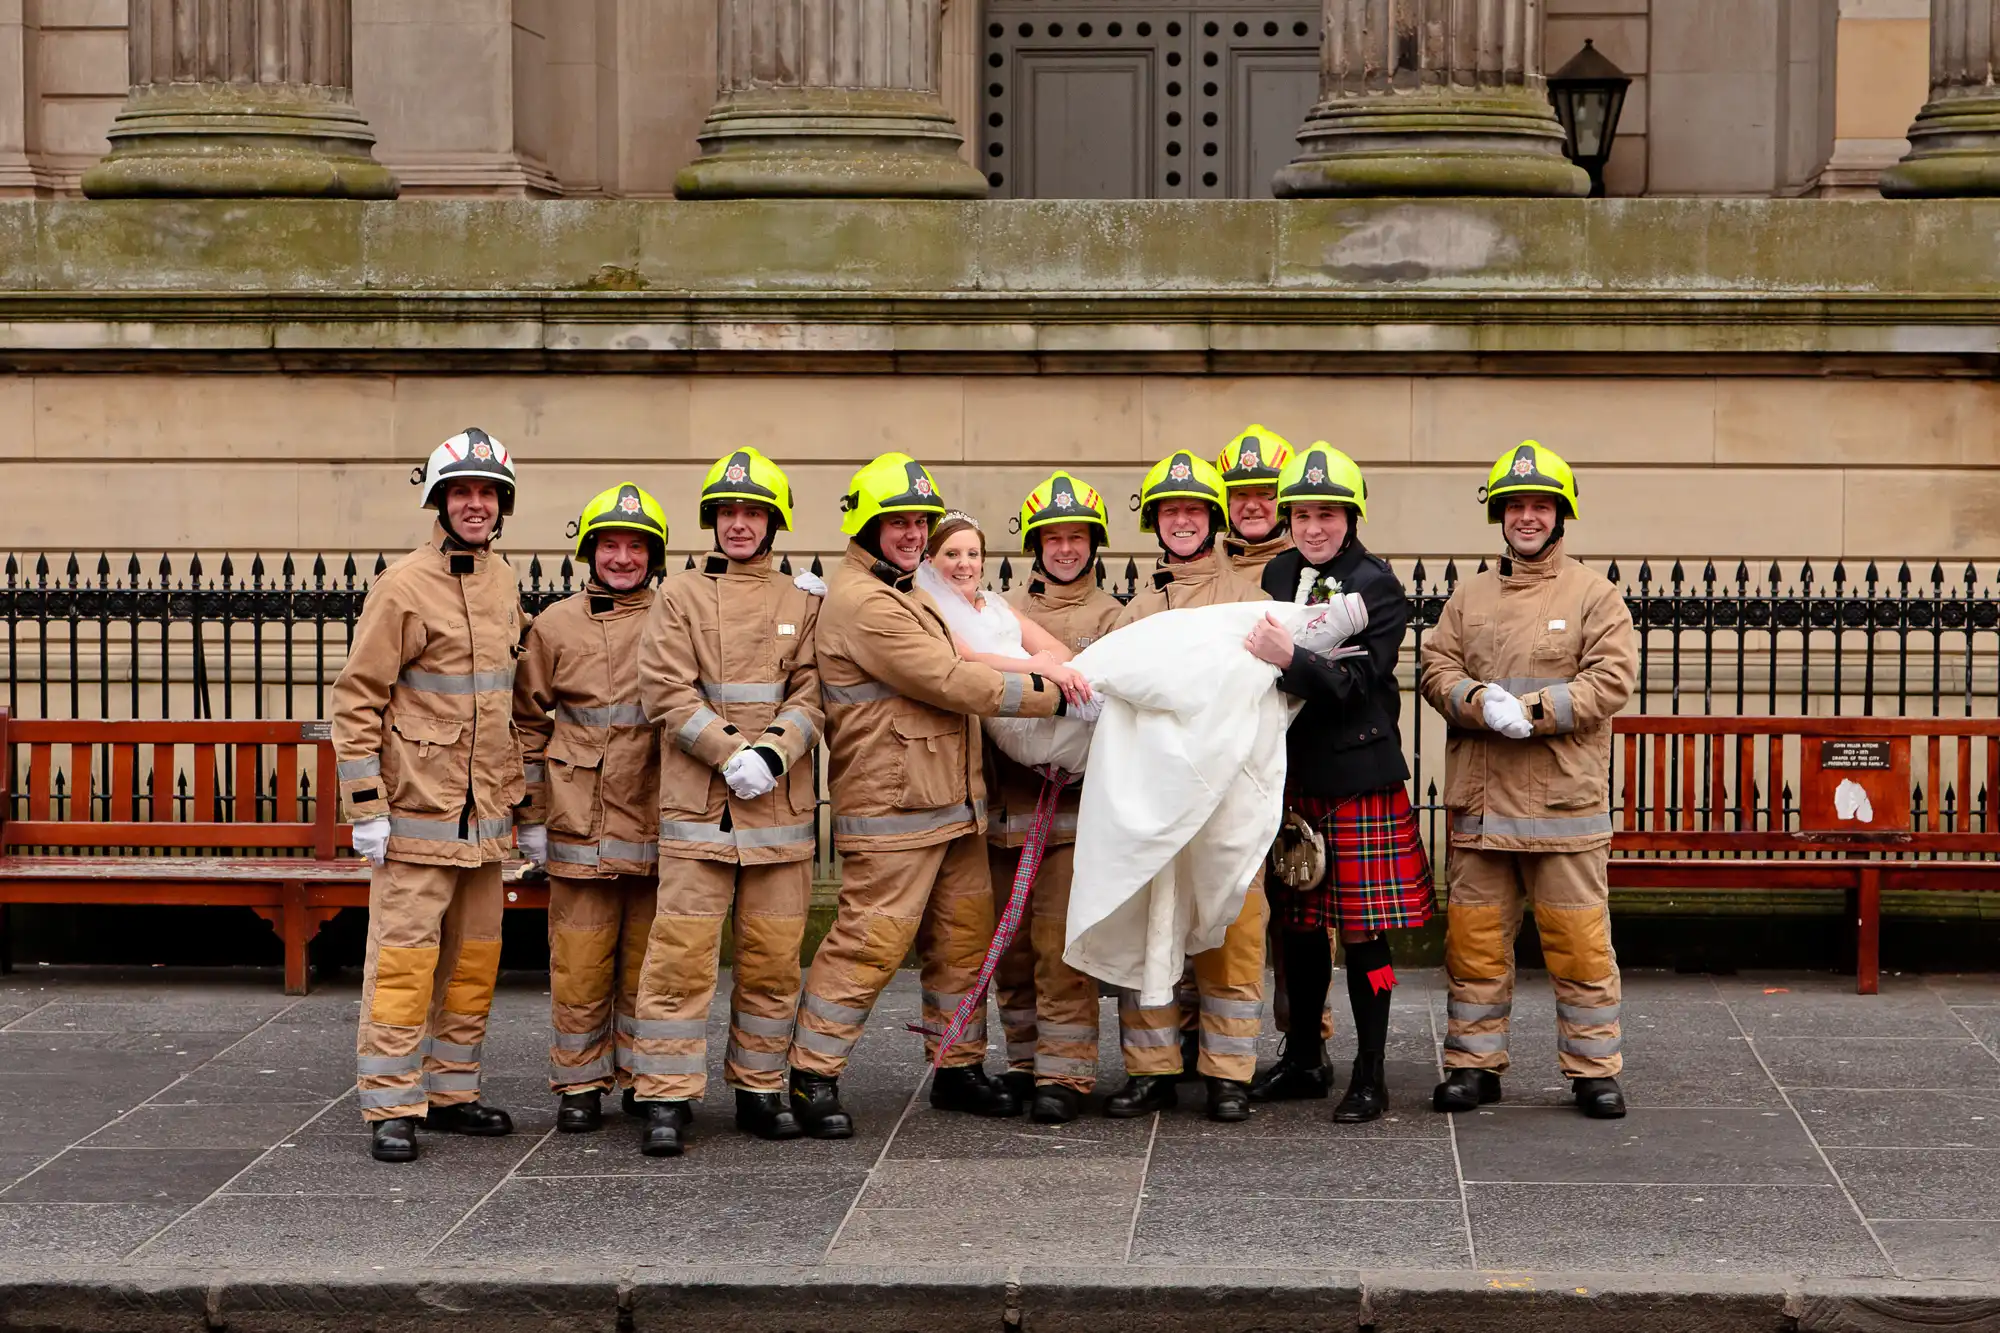 A group of eight firefighters in full gear, including one in a kilt, posing with a bride in front of a bench on a city street.